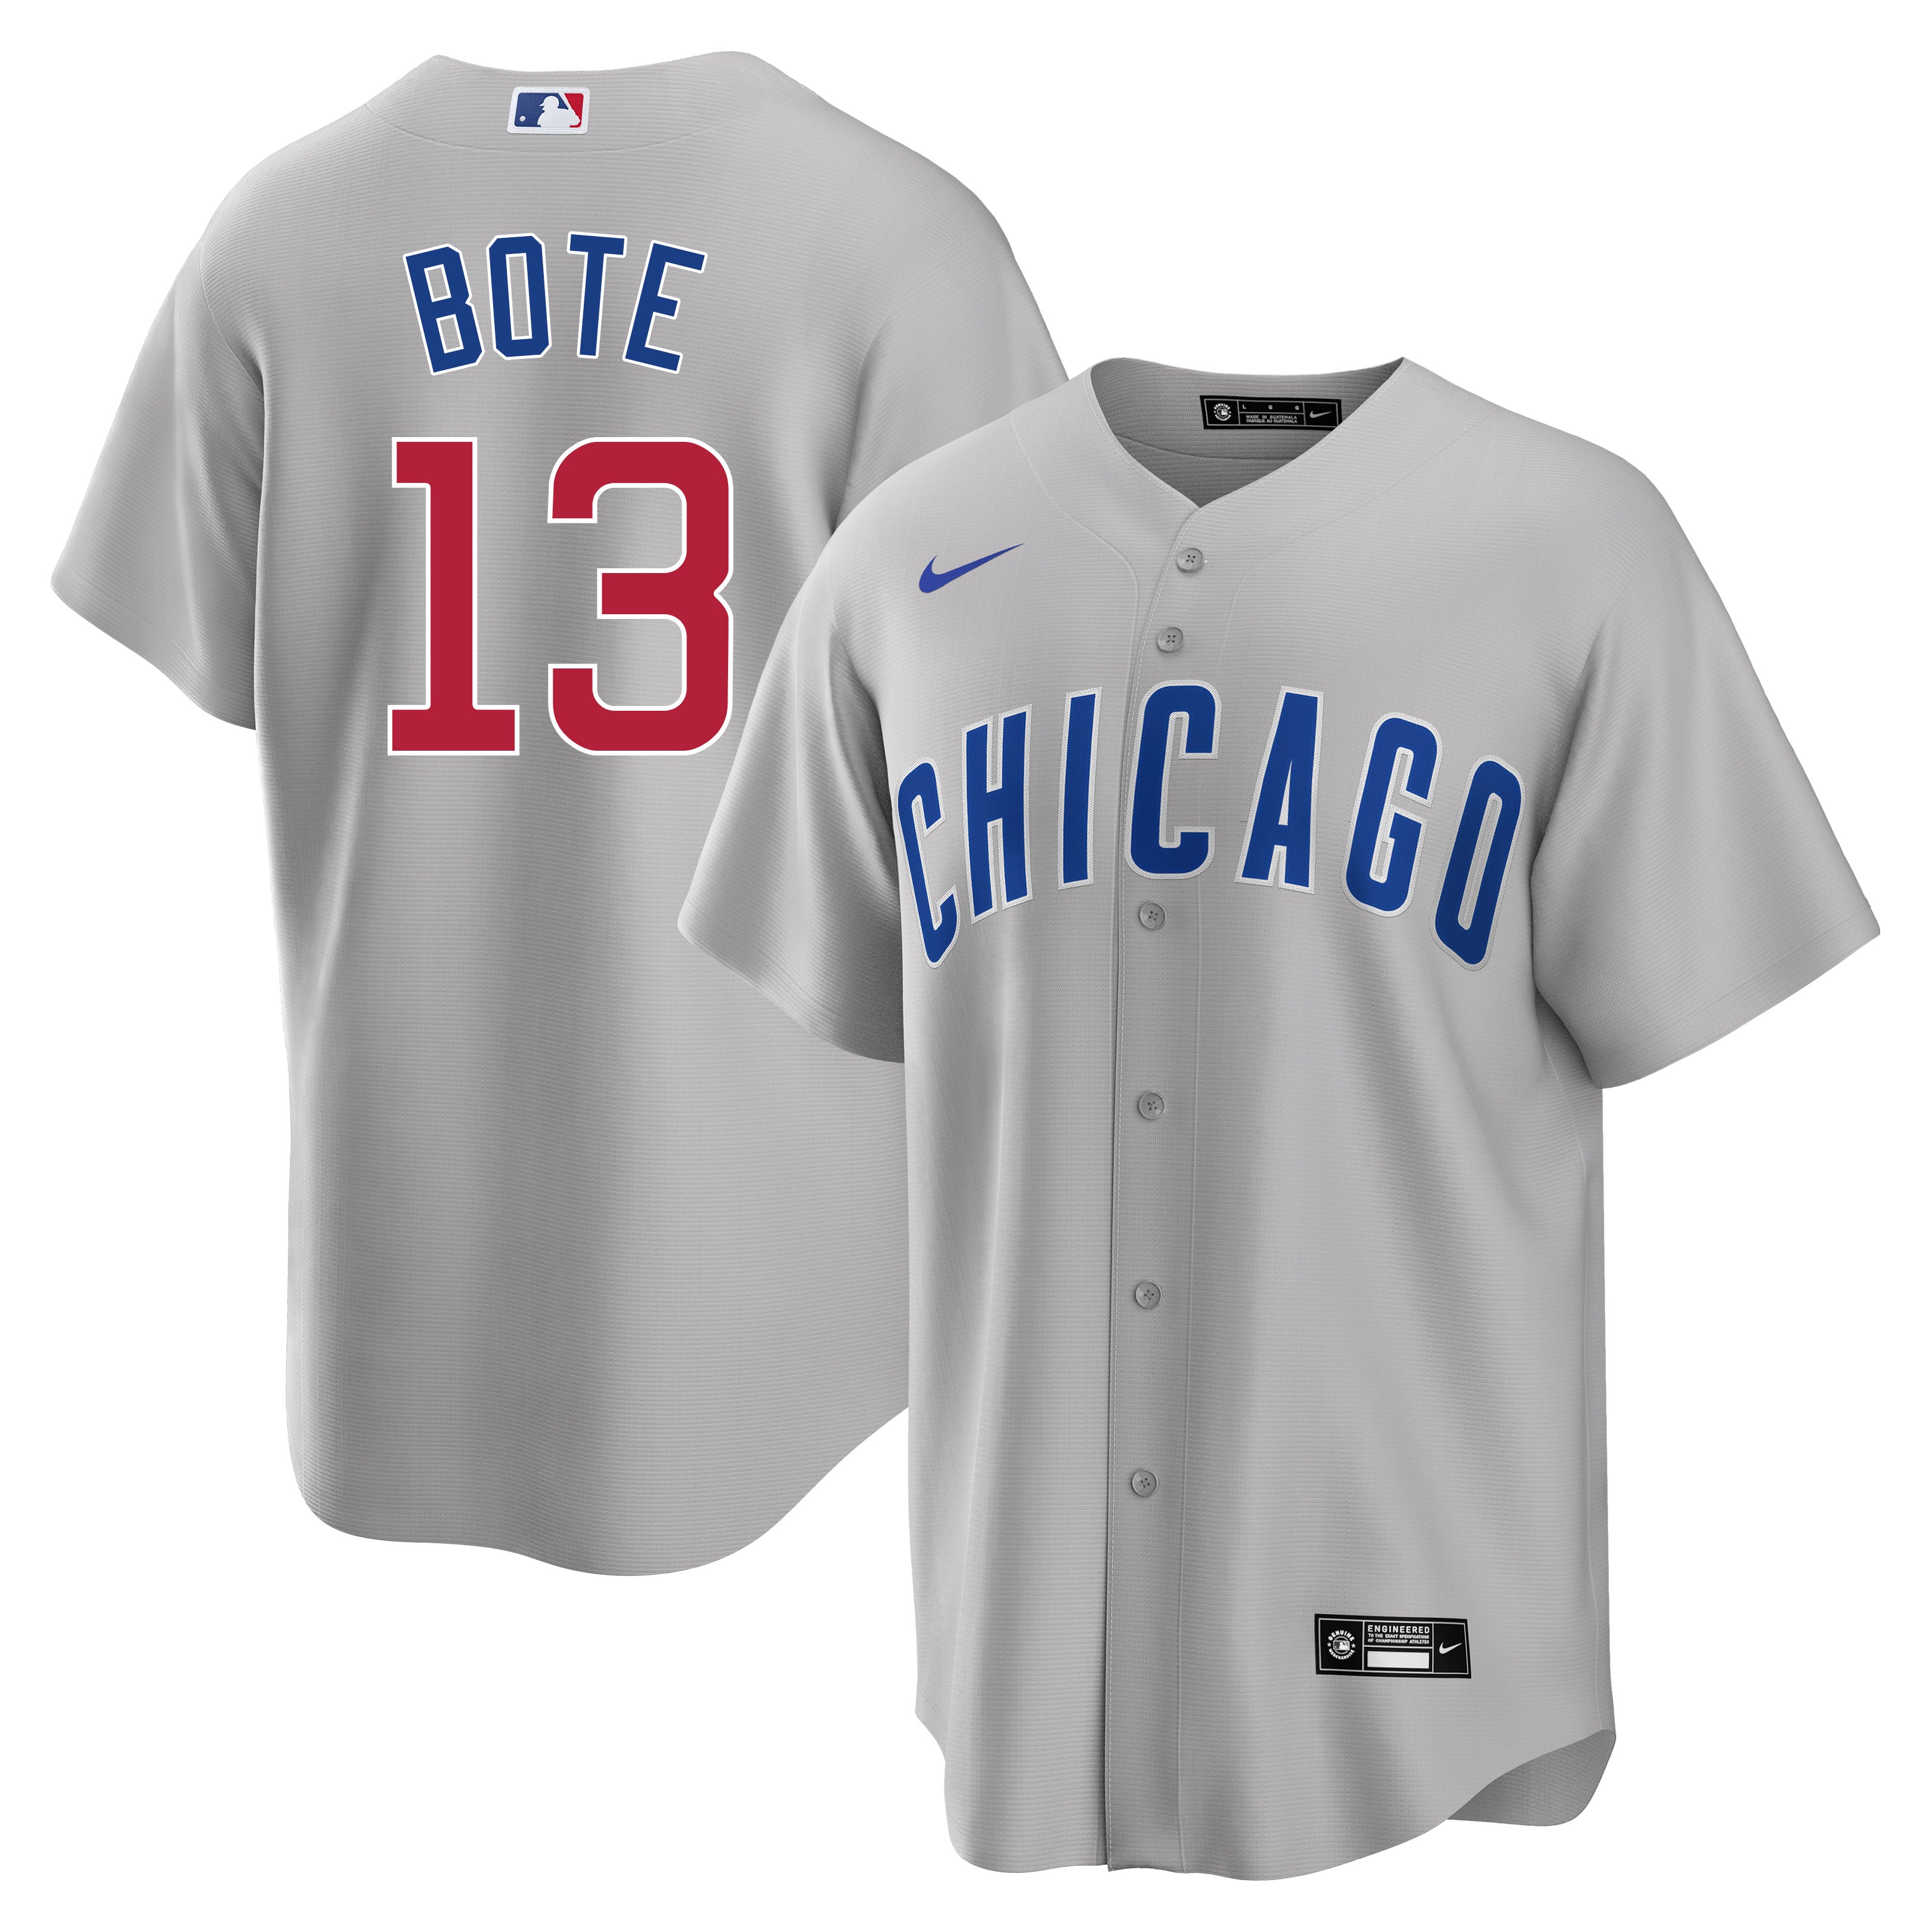 bote cubs jersey